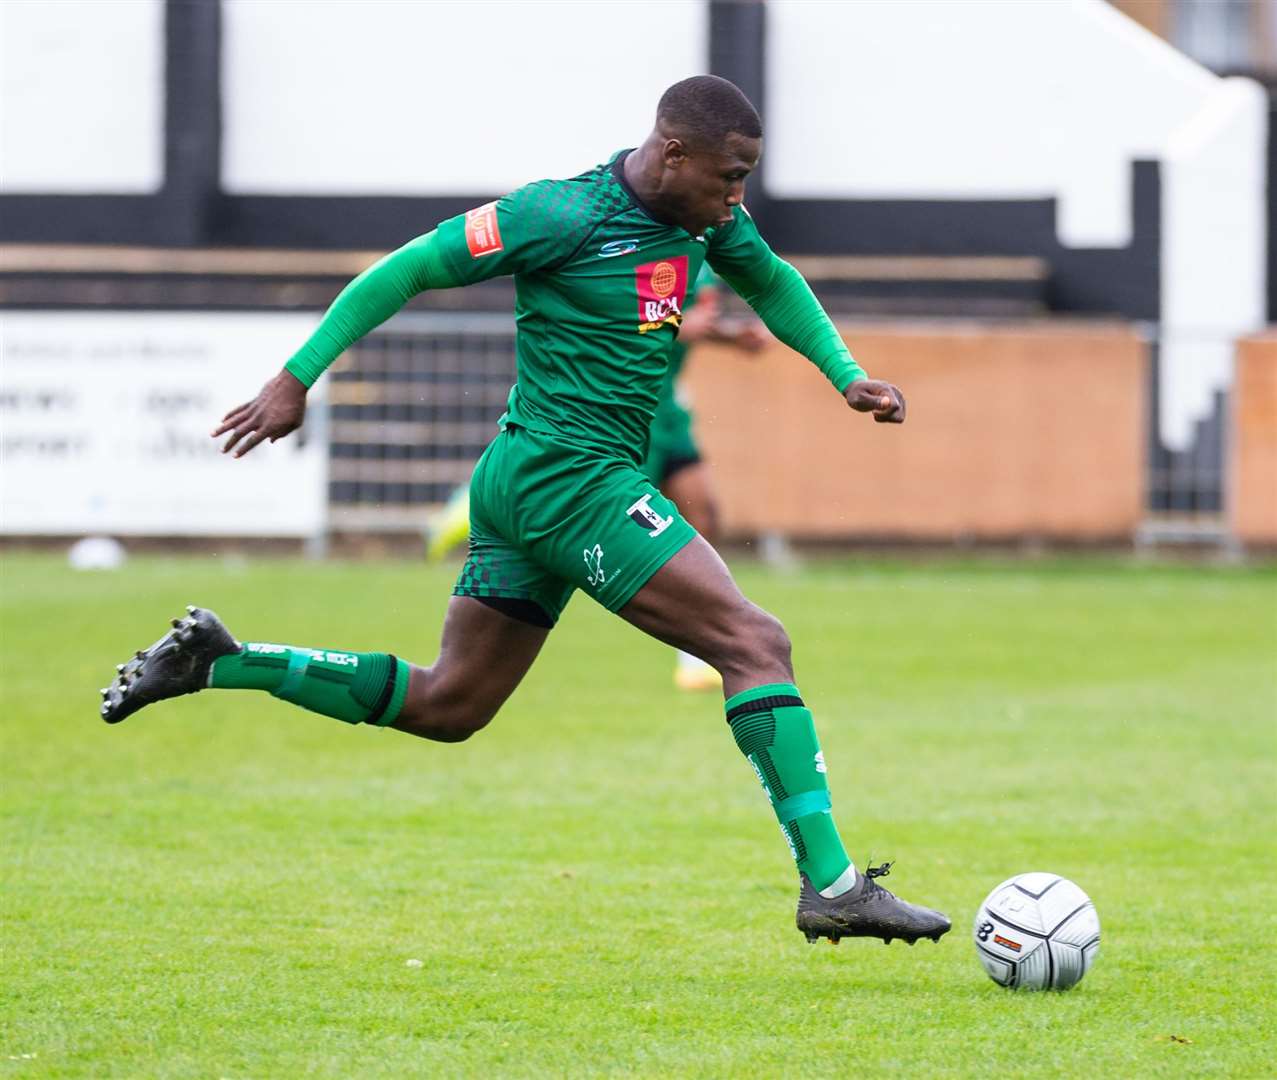 Ade Yusuff in action for Cray Valley at Maidenhead in the final qualifying round Picture: Dave Cumberbatch